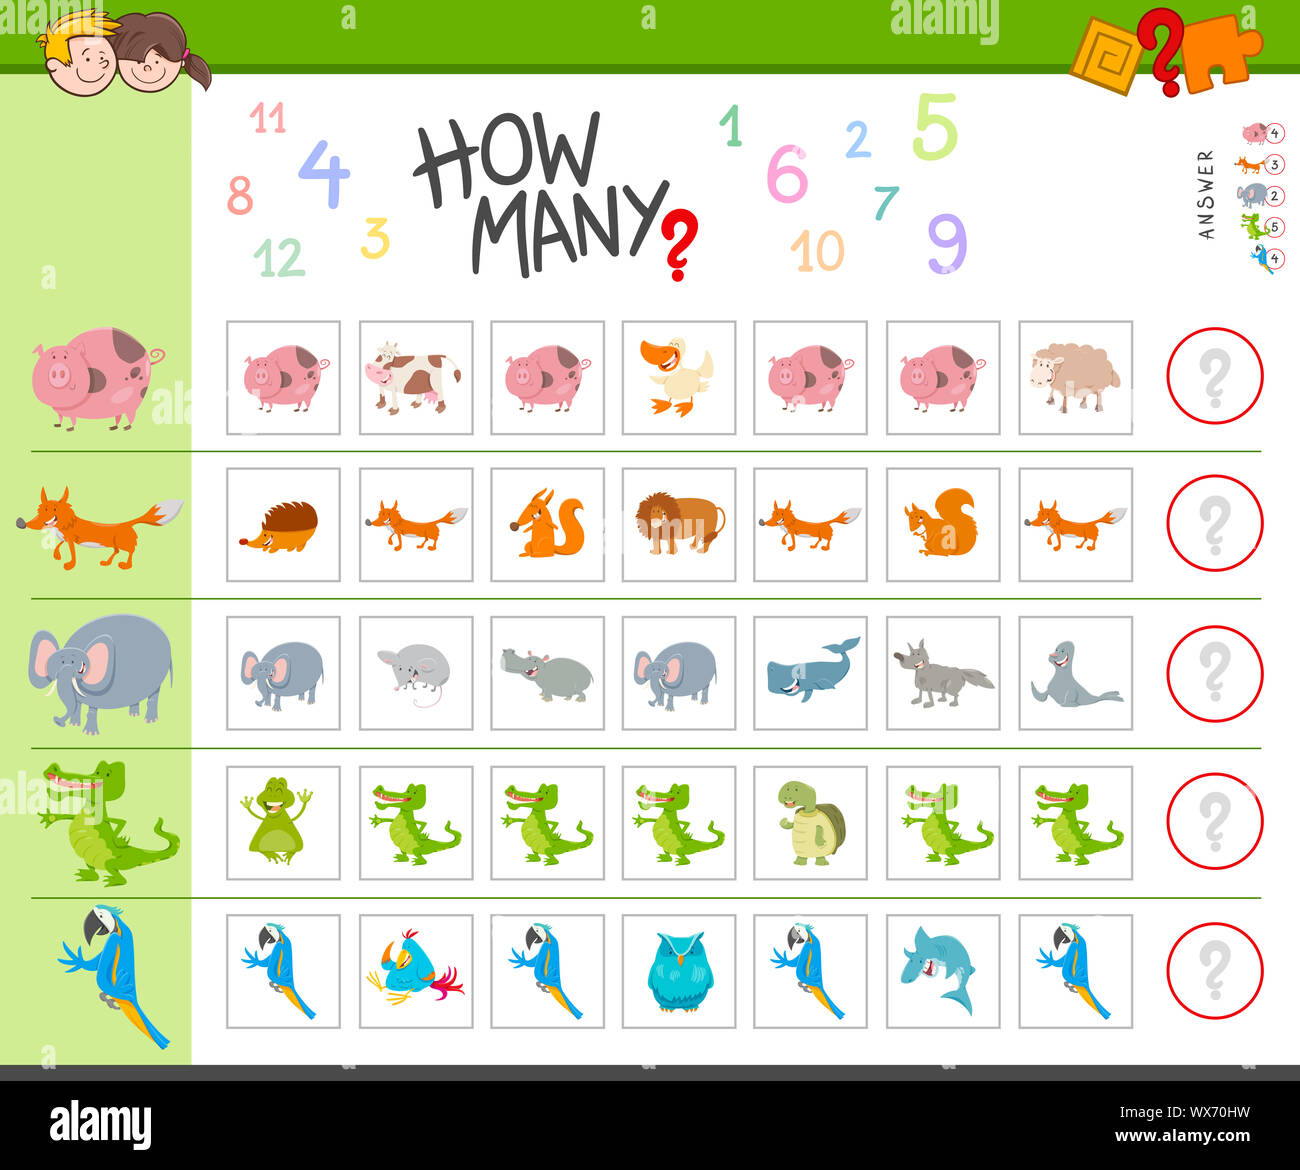 counting task with cartoon animals Stock Photo